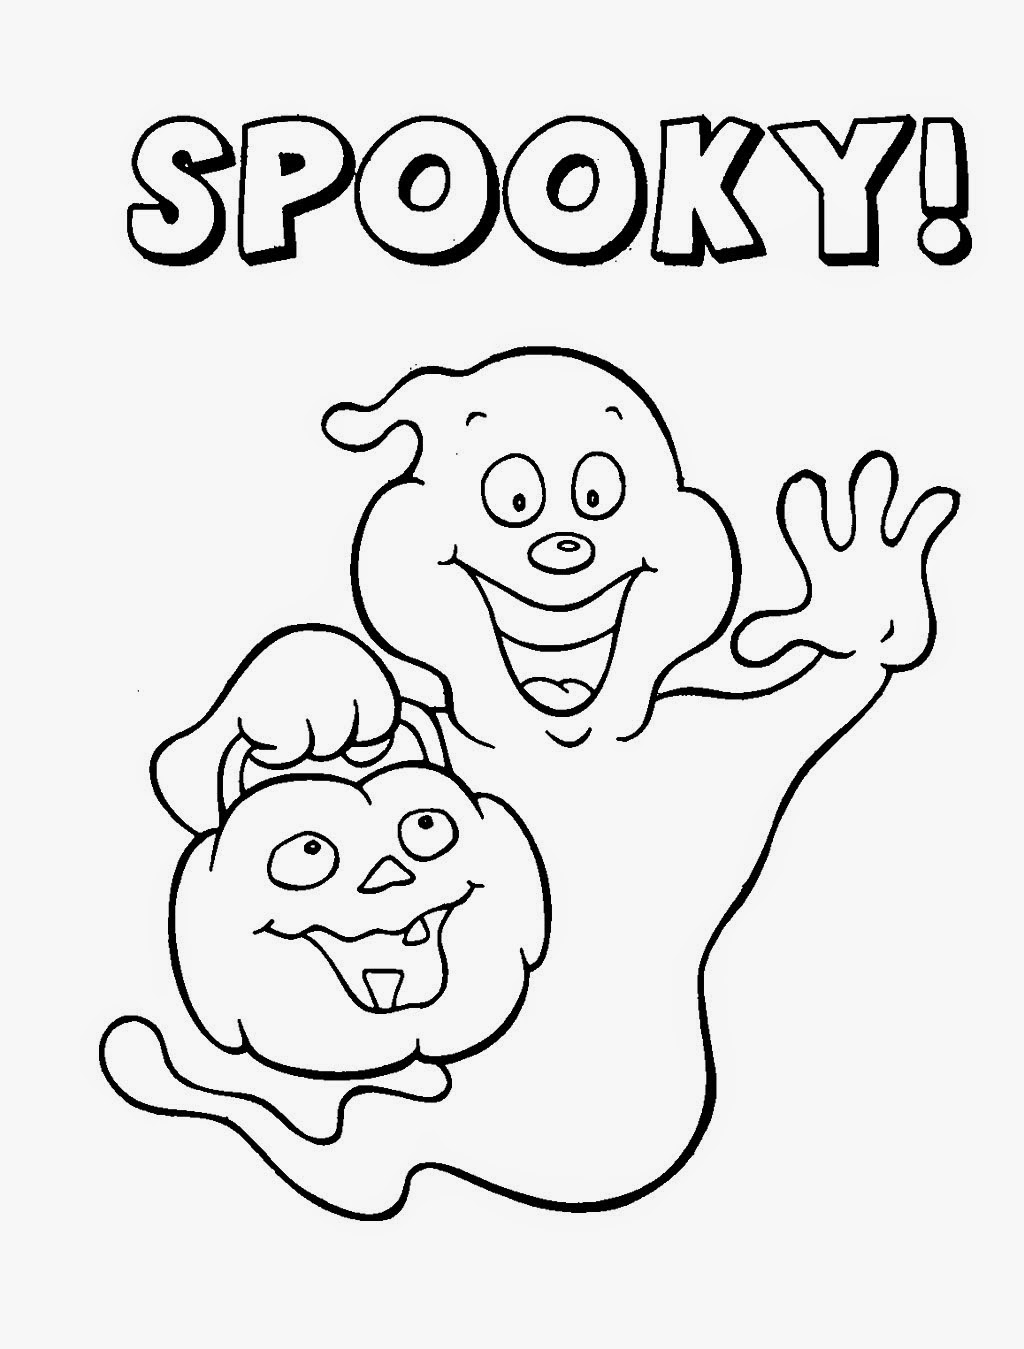 Halloween Colouring Pages Free For Kids - scary halloween coloring pages printables